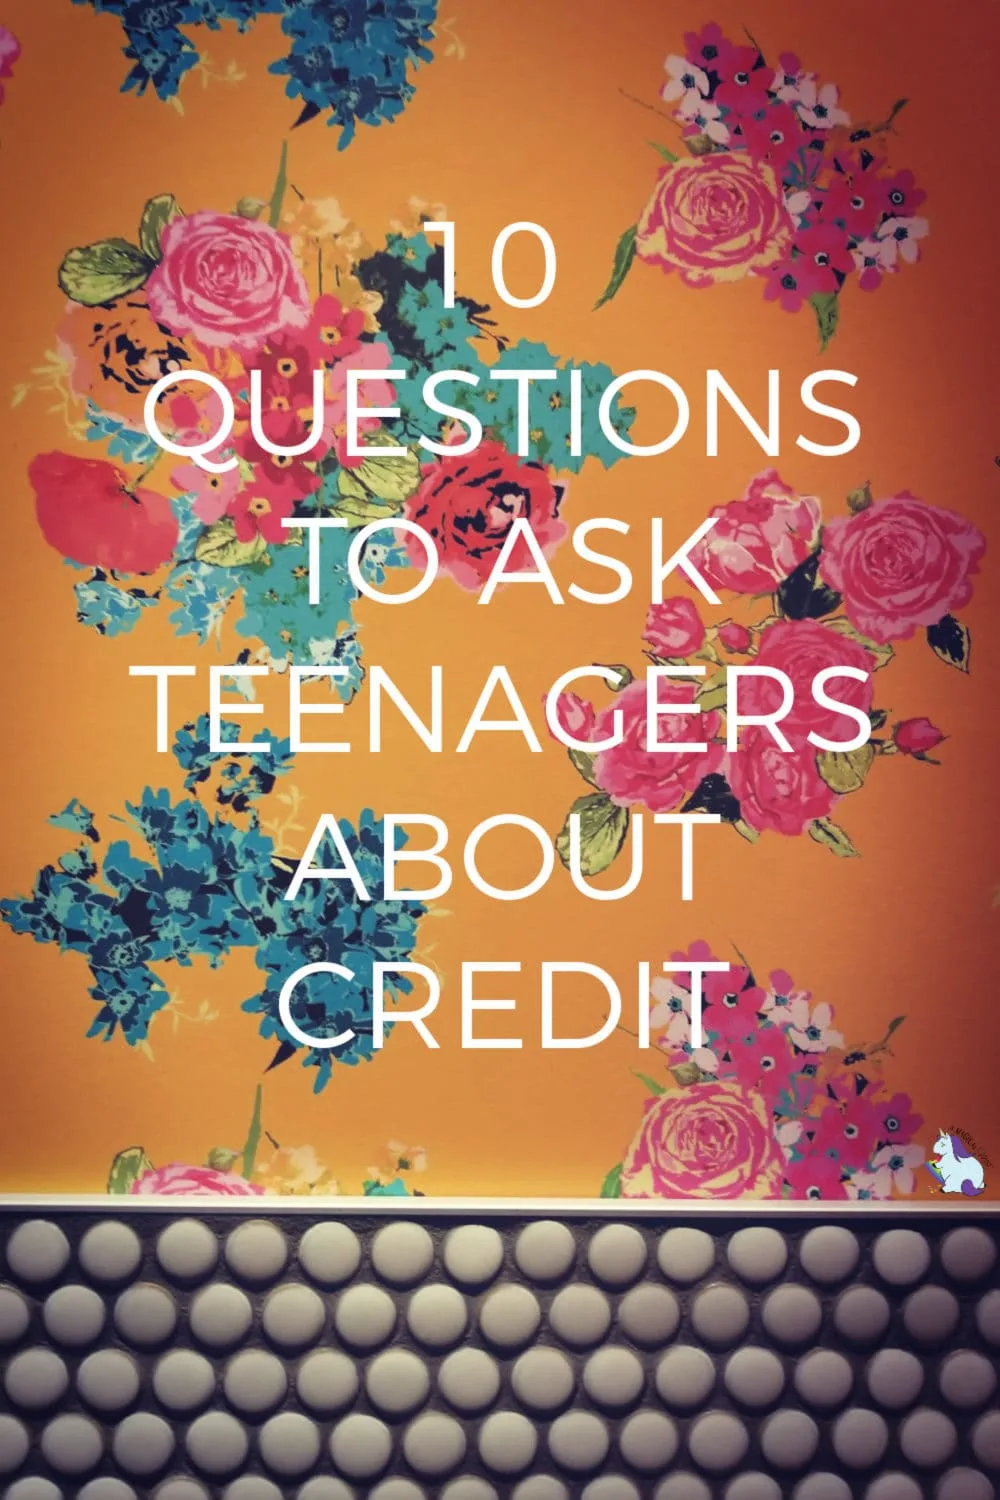 10 Questions to ask Teenagers About Credit on floral background